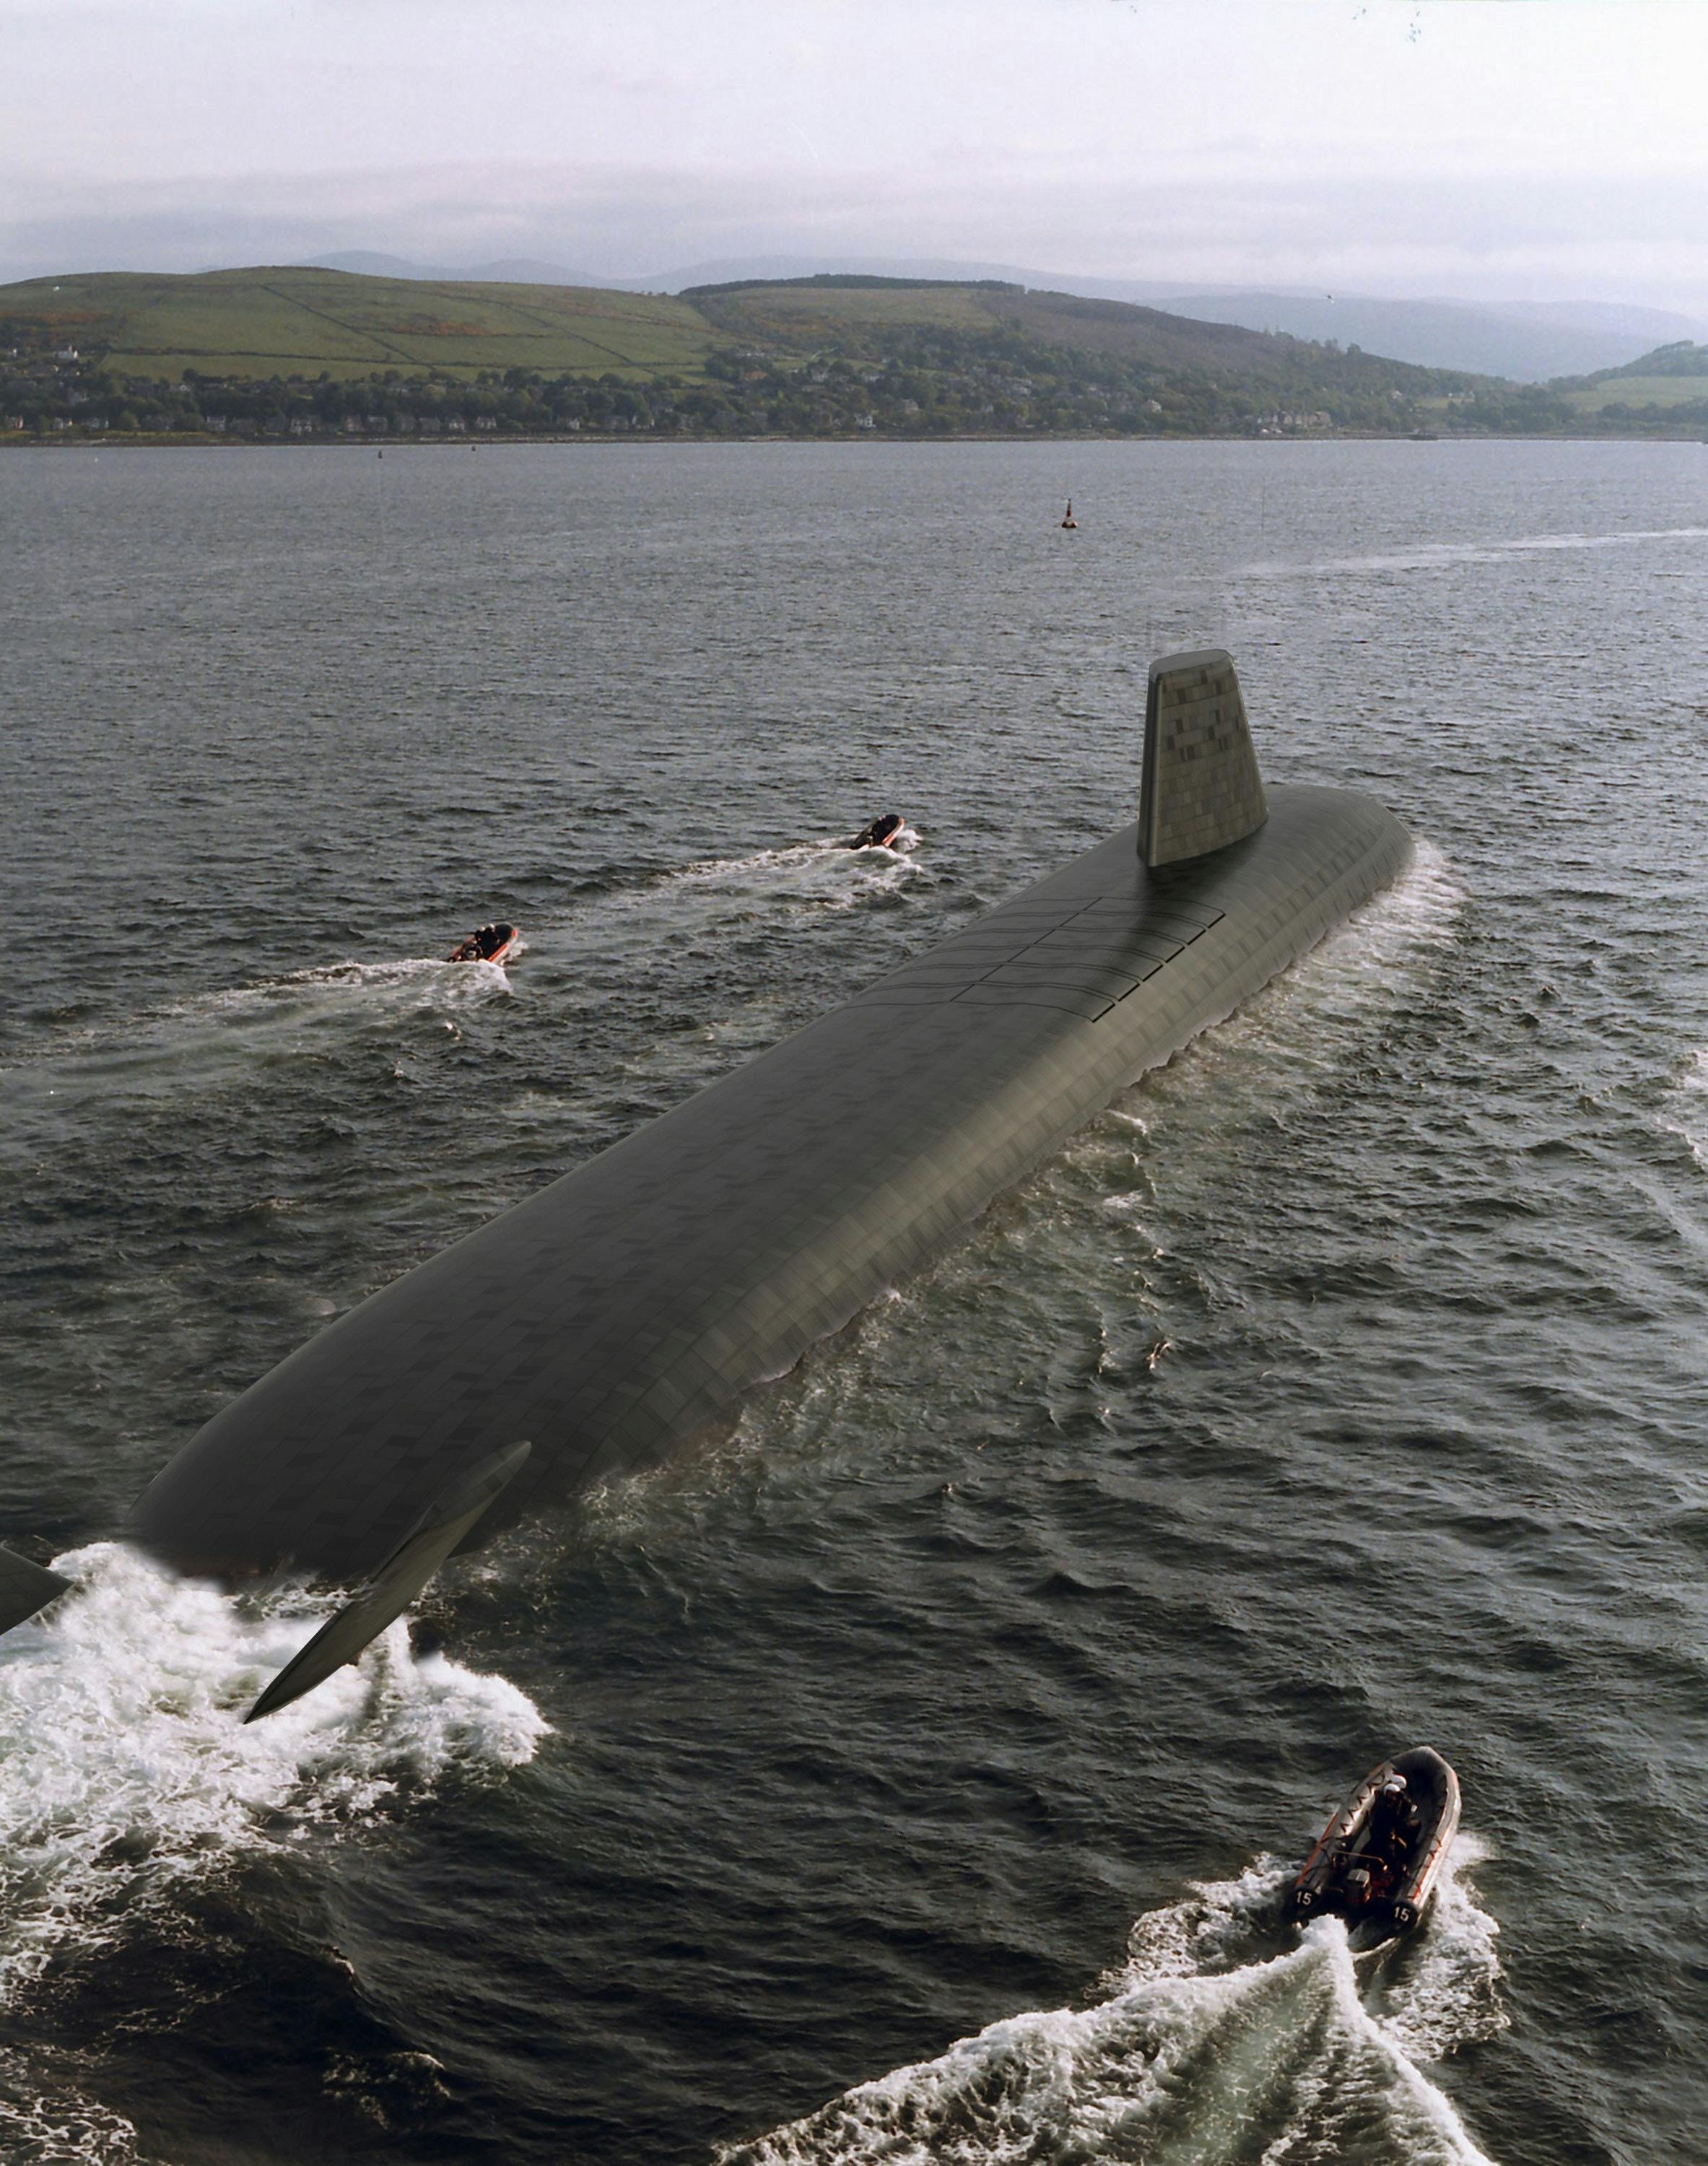 This Trident Submarine is a Nuclear powered vessel contributing to NATO's nuclear deterrent. It is an advanced, high speed, long endurance underwater sub. These displace over 16 thousand tonnes and offer spacious accommodation on three decks. These carry